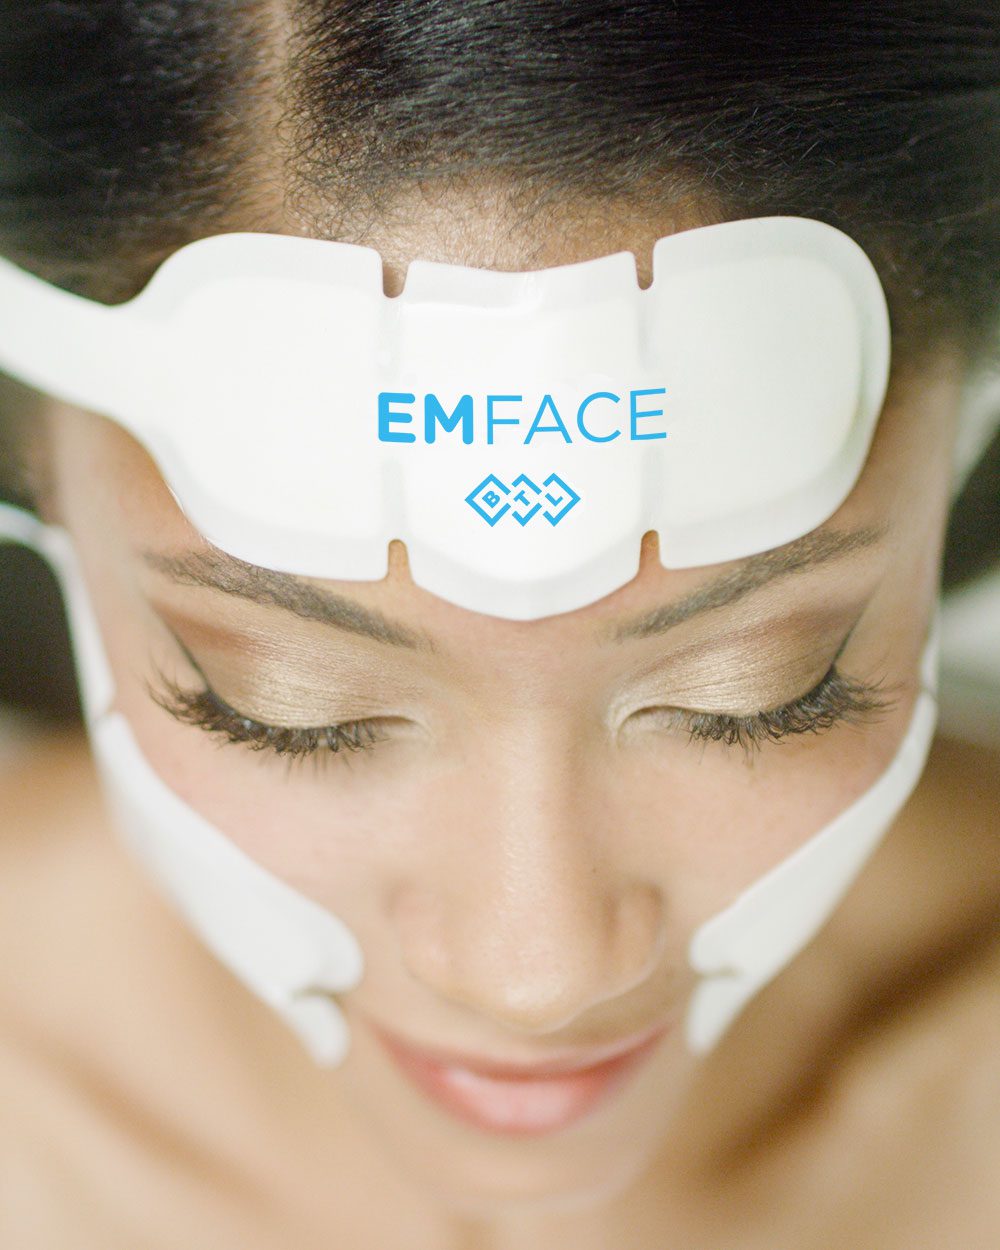 A beautiful woman wears the EMface device to lift and firm her face at Optimum Human in Albuquerque, NM.